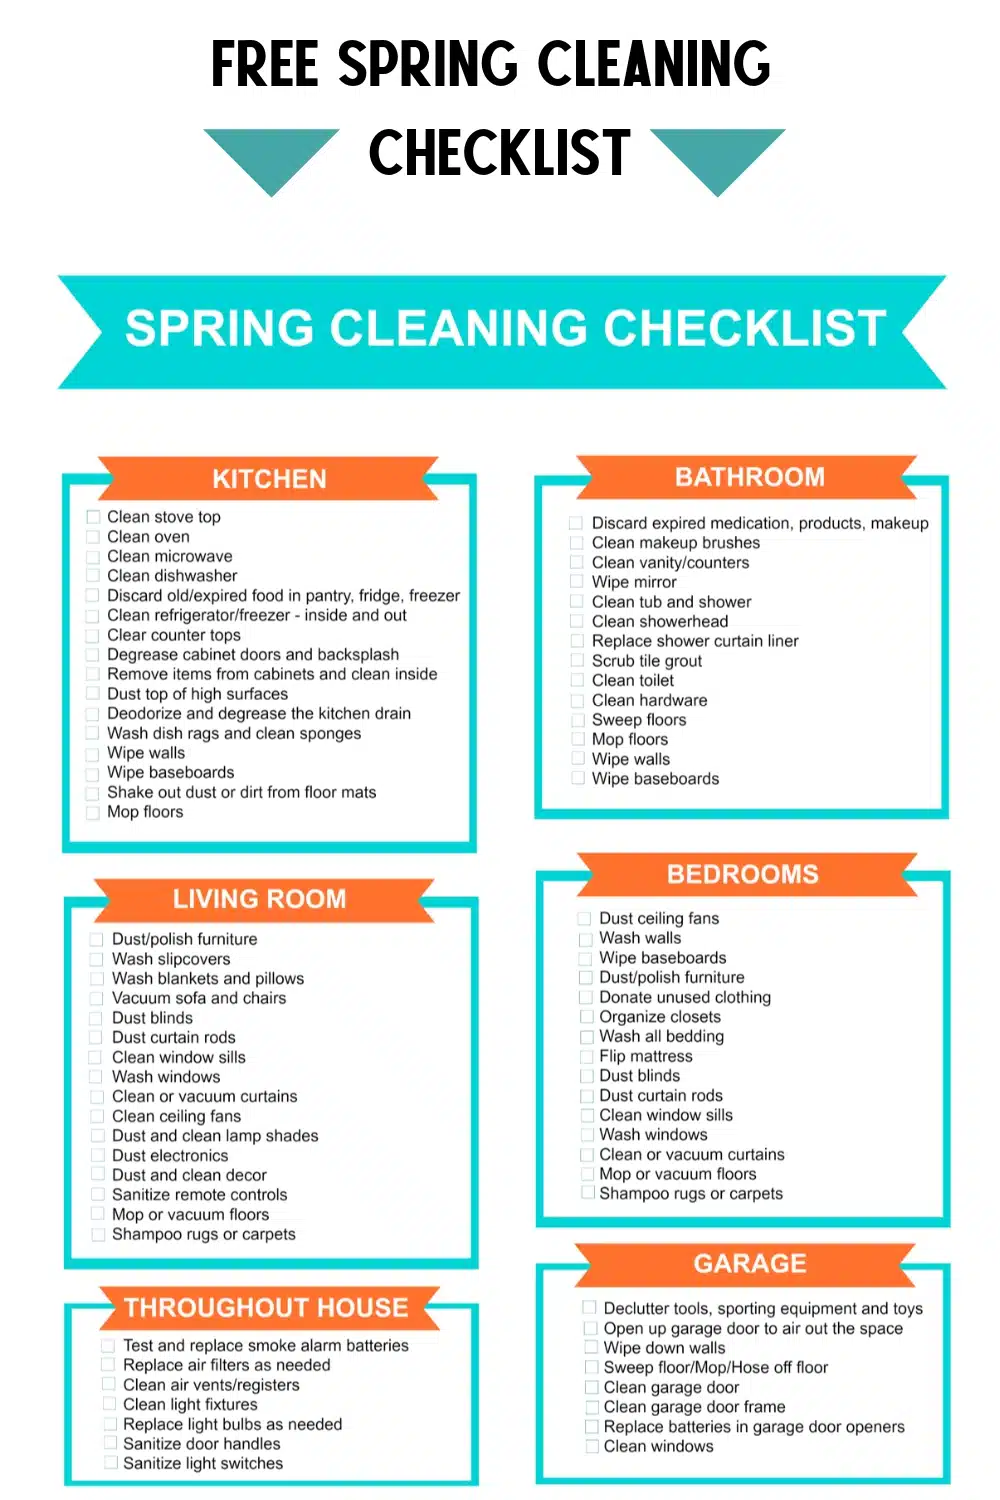 Spring Cleaning Tips From Professionals And #Free Spring Cleaning Check List